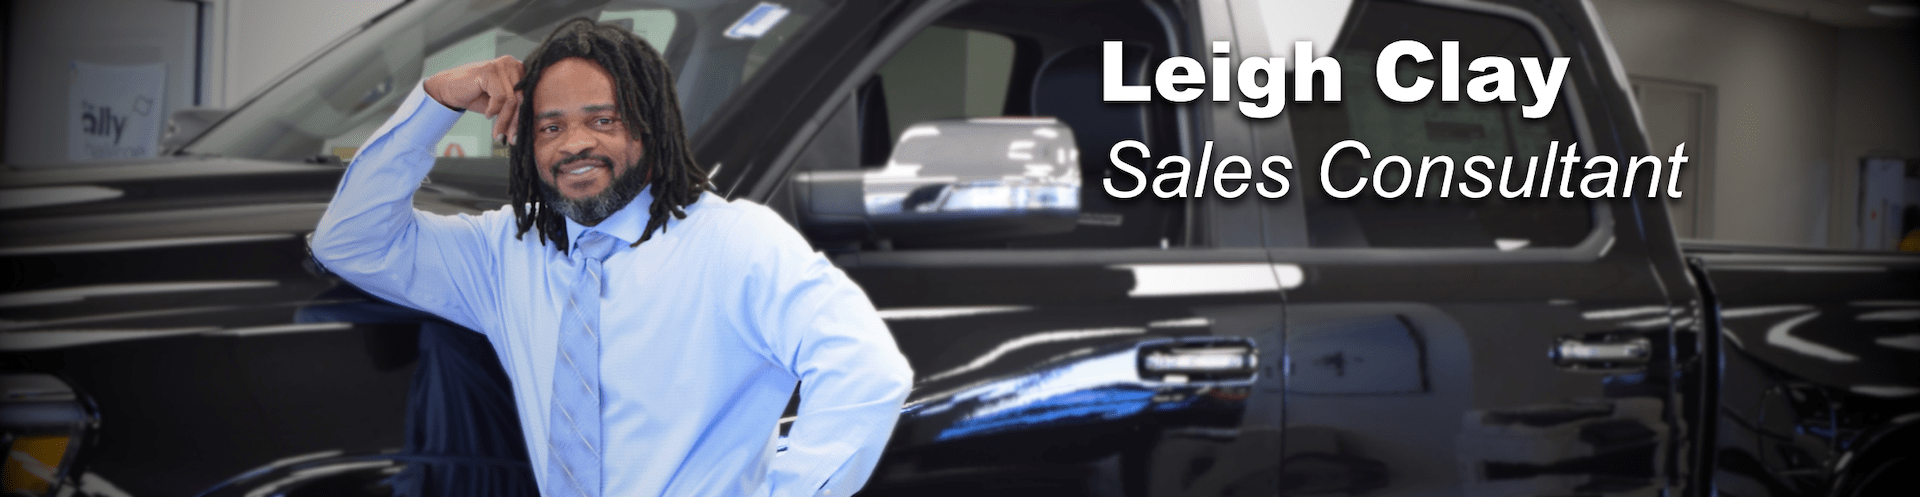 leigh clay sales consultant prestige chrysler dodge jeep ram